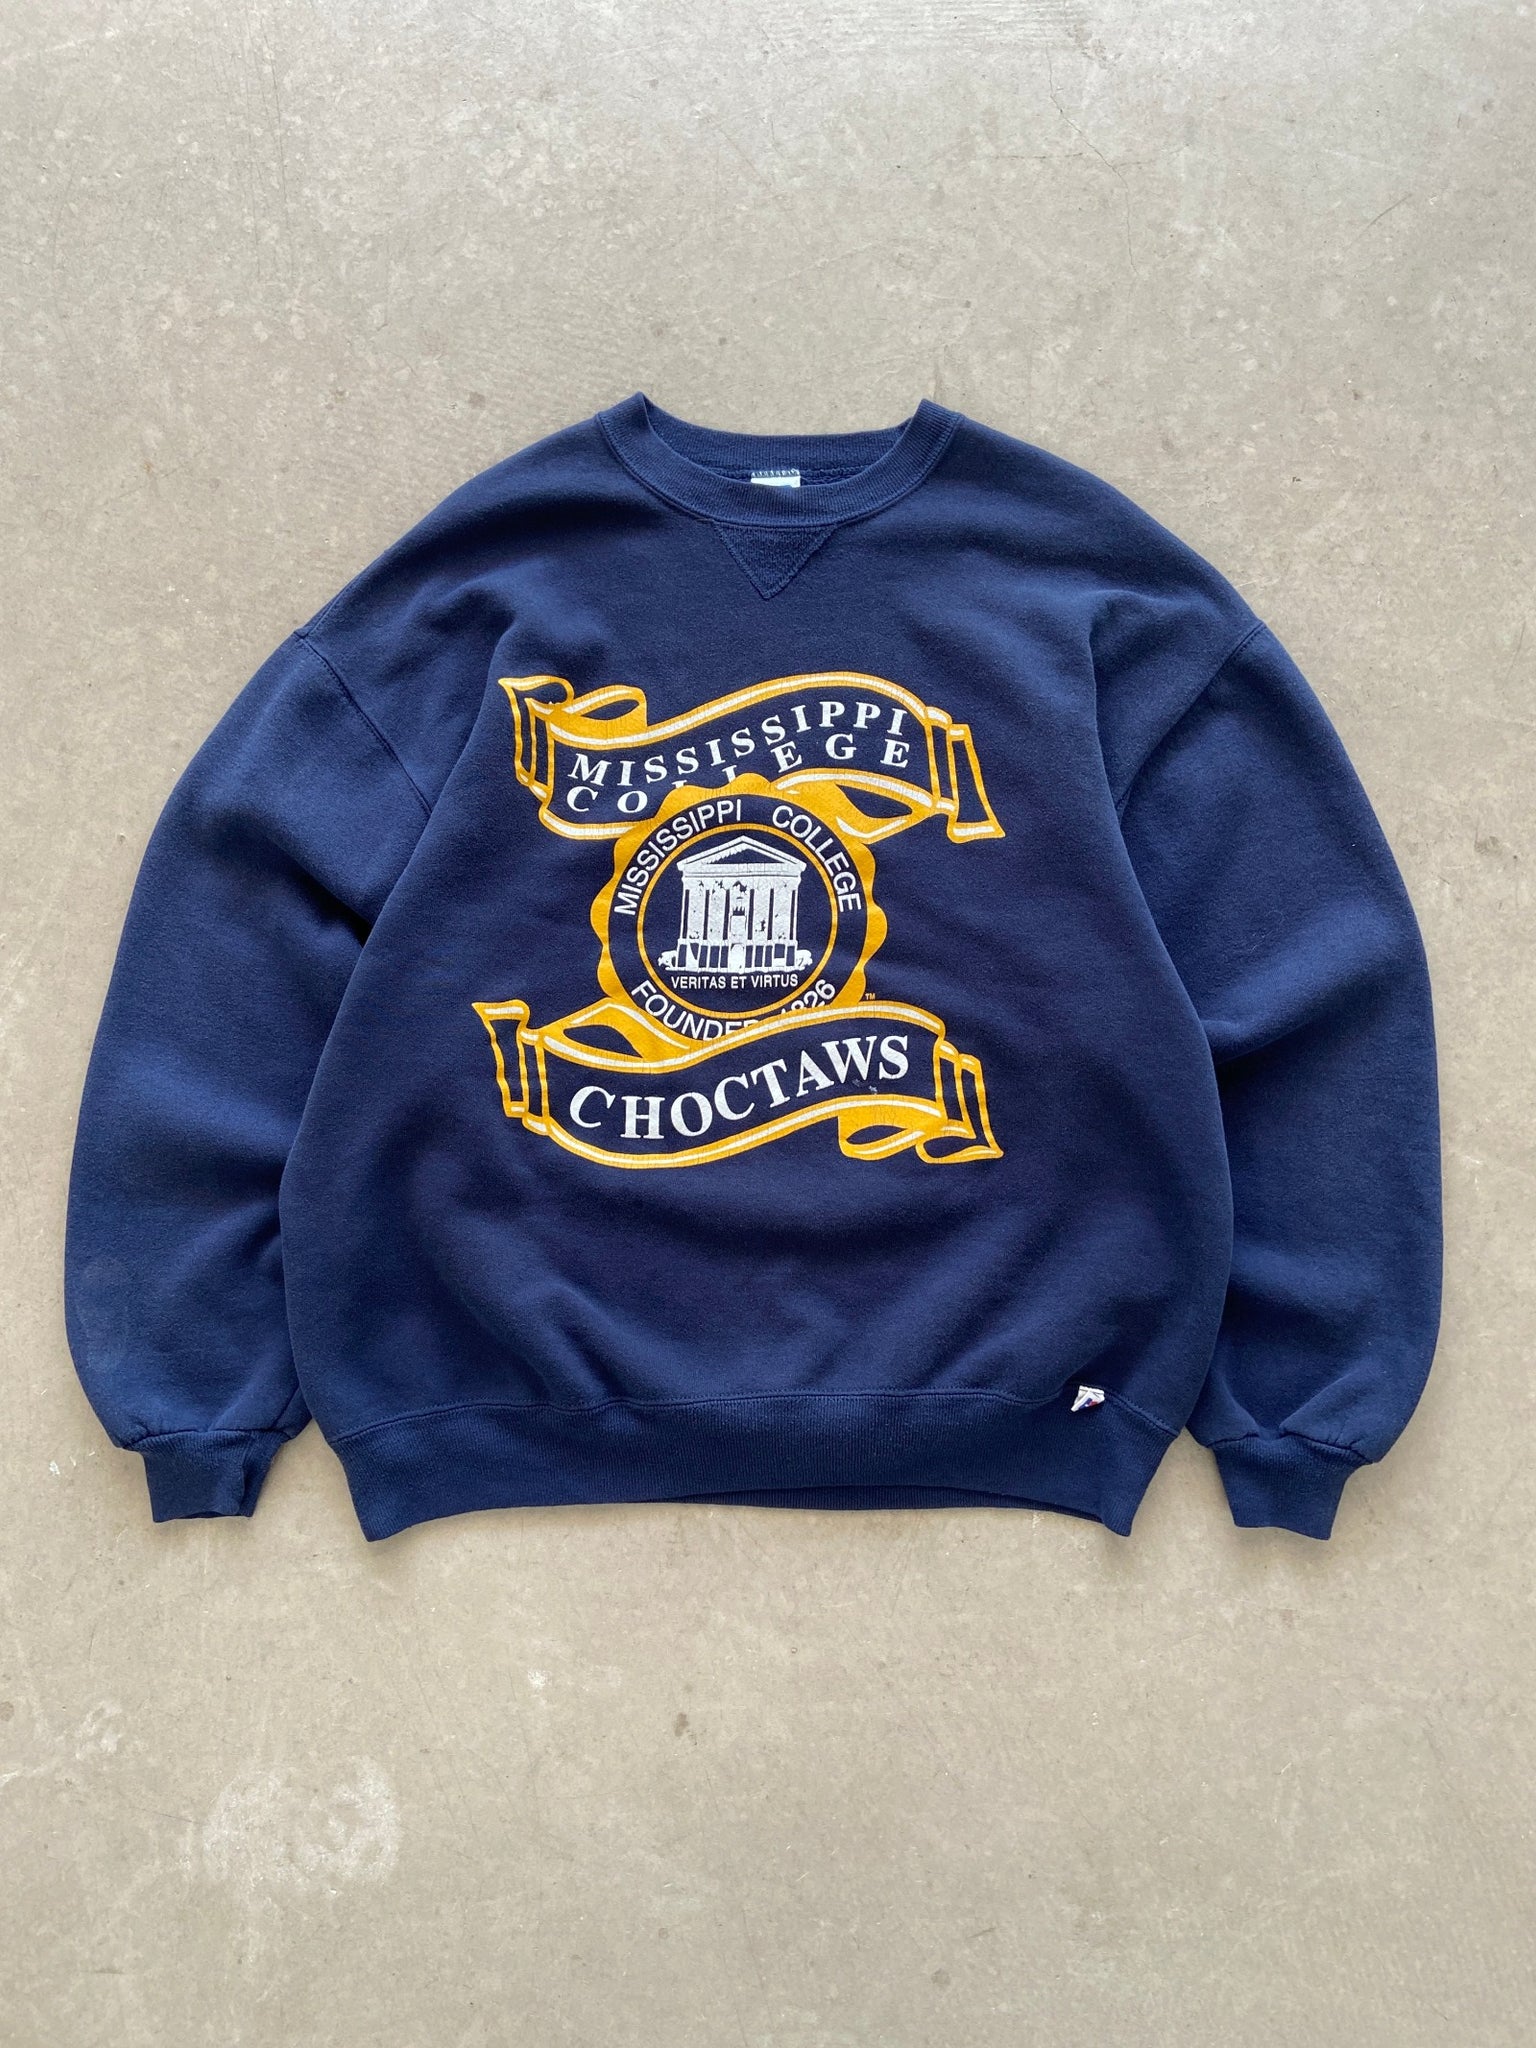 1990's Russell Athletic Mississippi College Sweat - XL